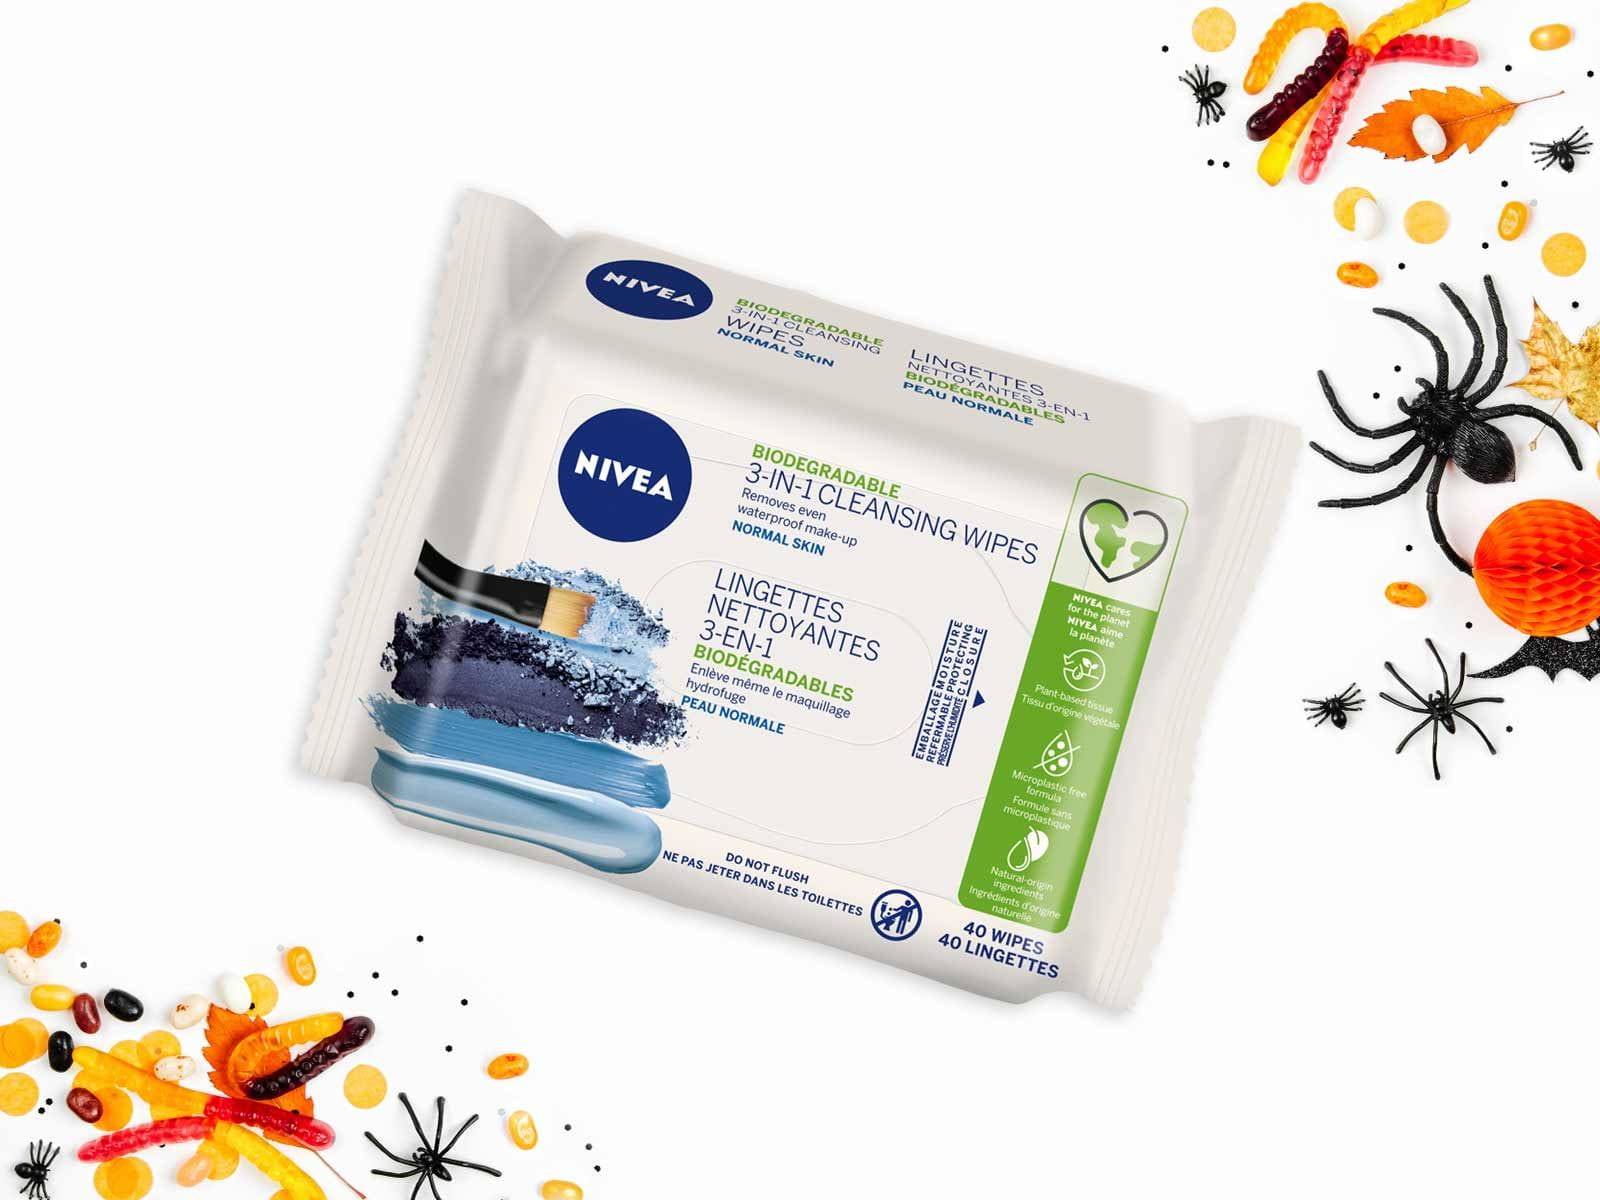 View of Nivea 3 in 1 biodegradable cleansing wipes for normal skin product package against a white background with Fall décor.